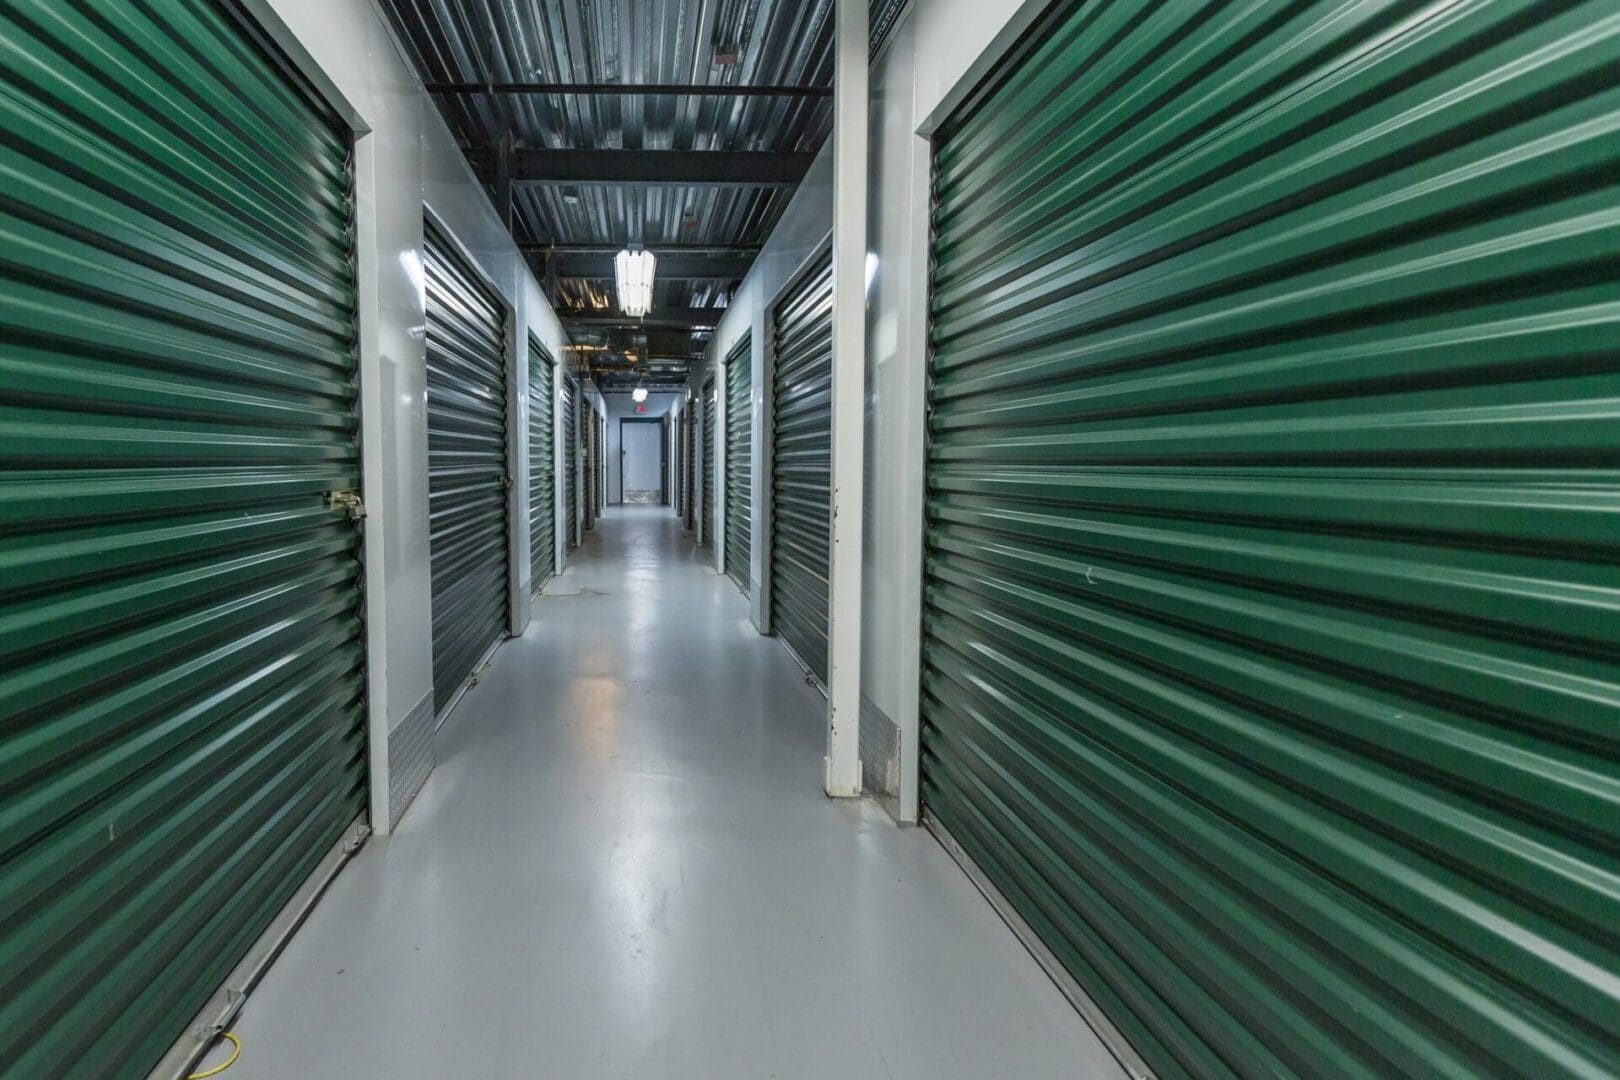 A long hallway with many green doors